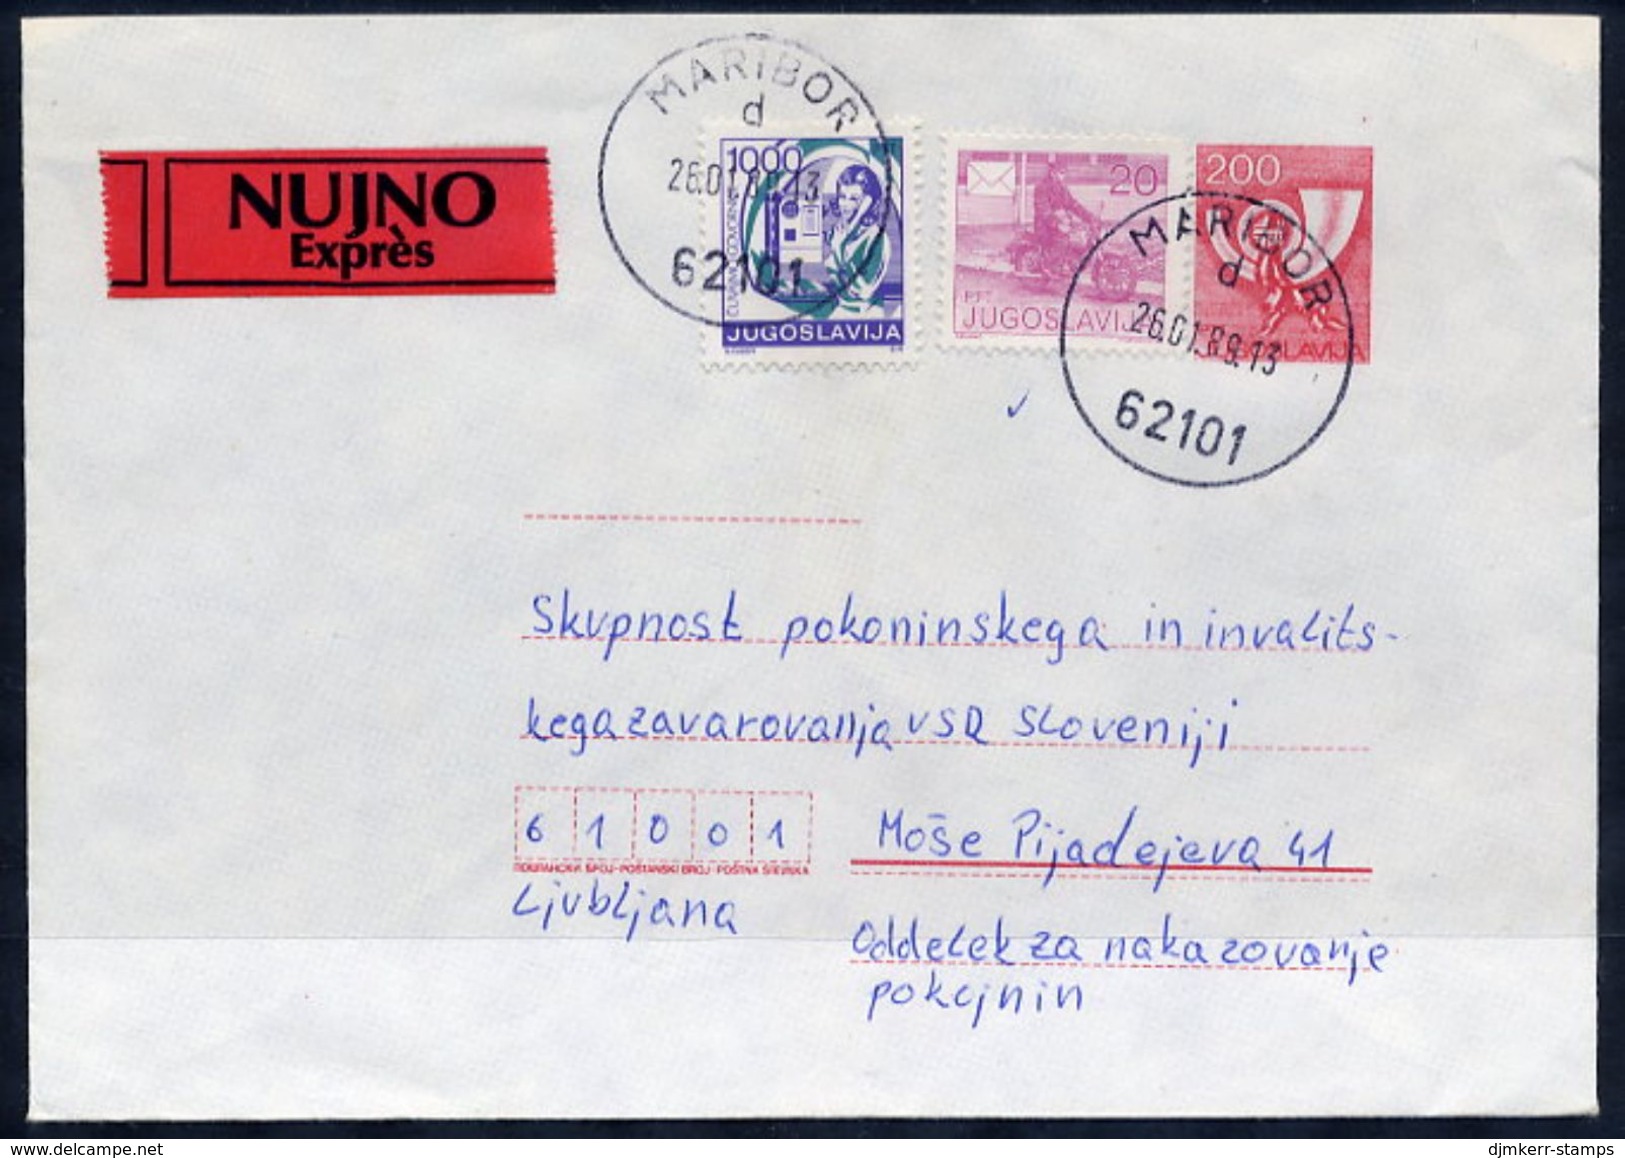 YUGOSLAVIA 1988 Posthorn 200 D.stationery Envelope With  Used With Additional Franking And Express Label.  Michel U82 - Ganzsachen